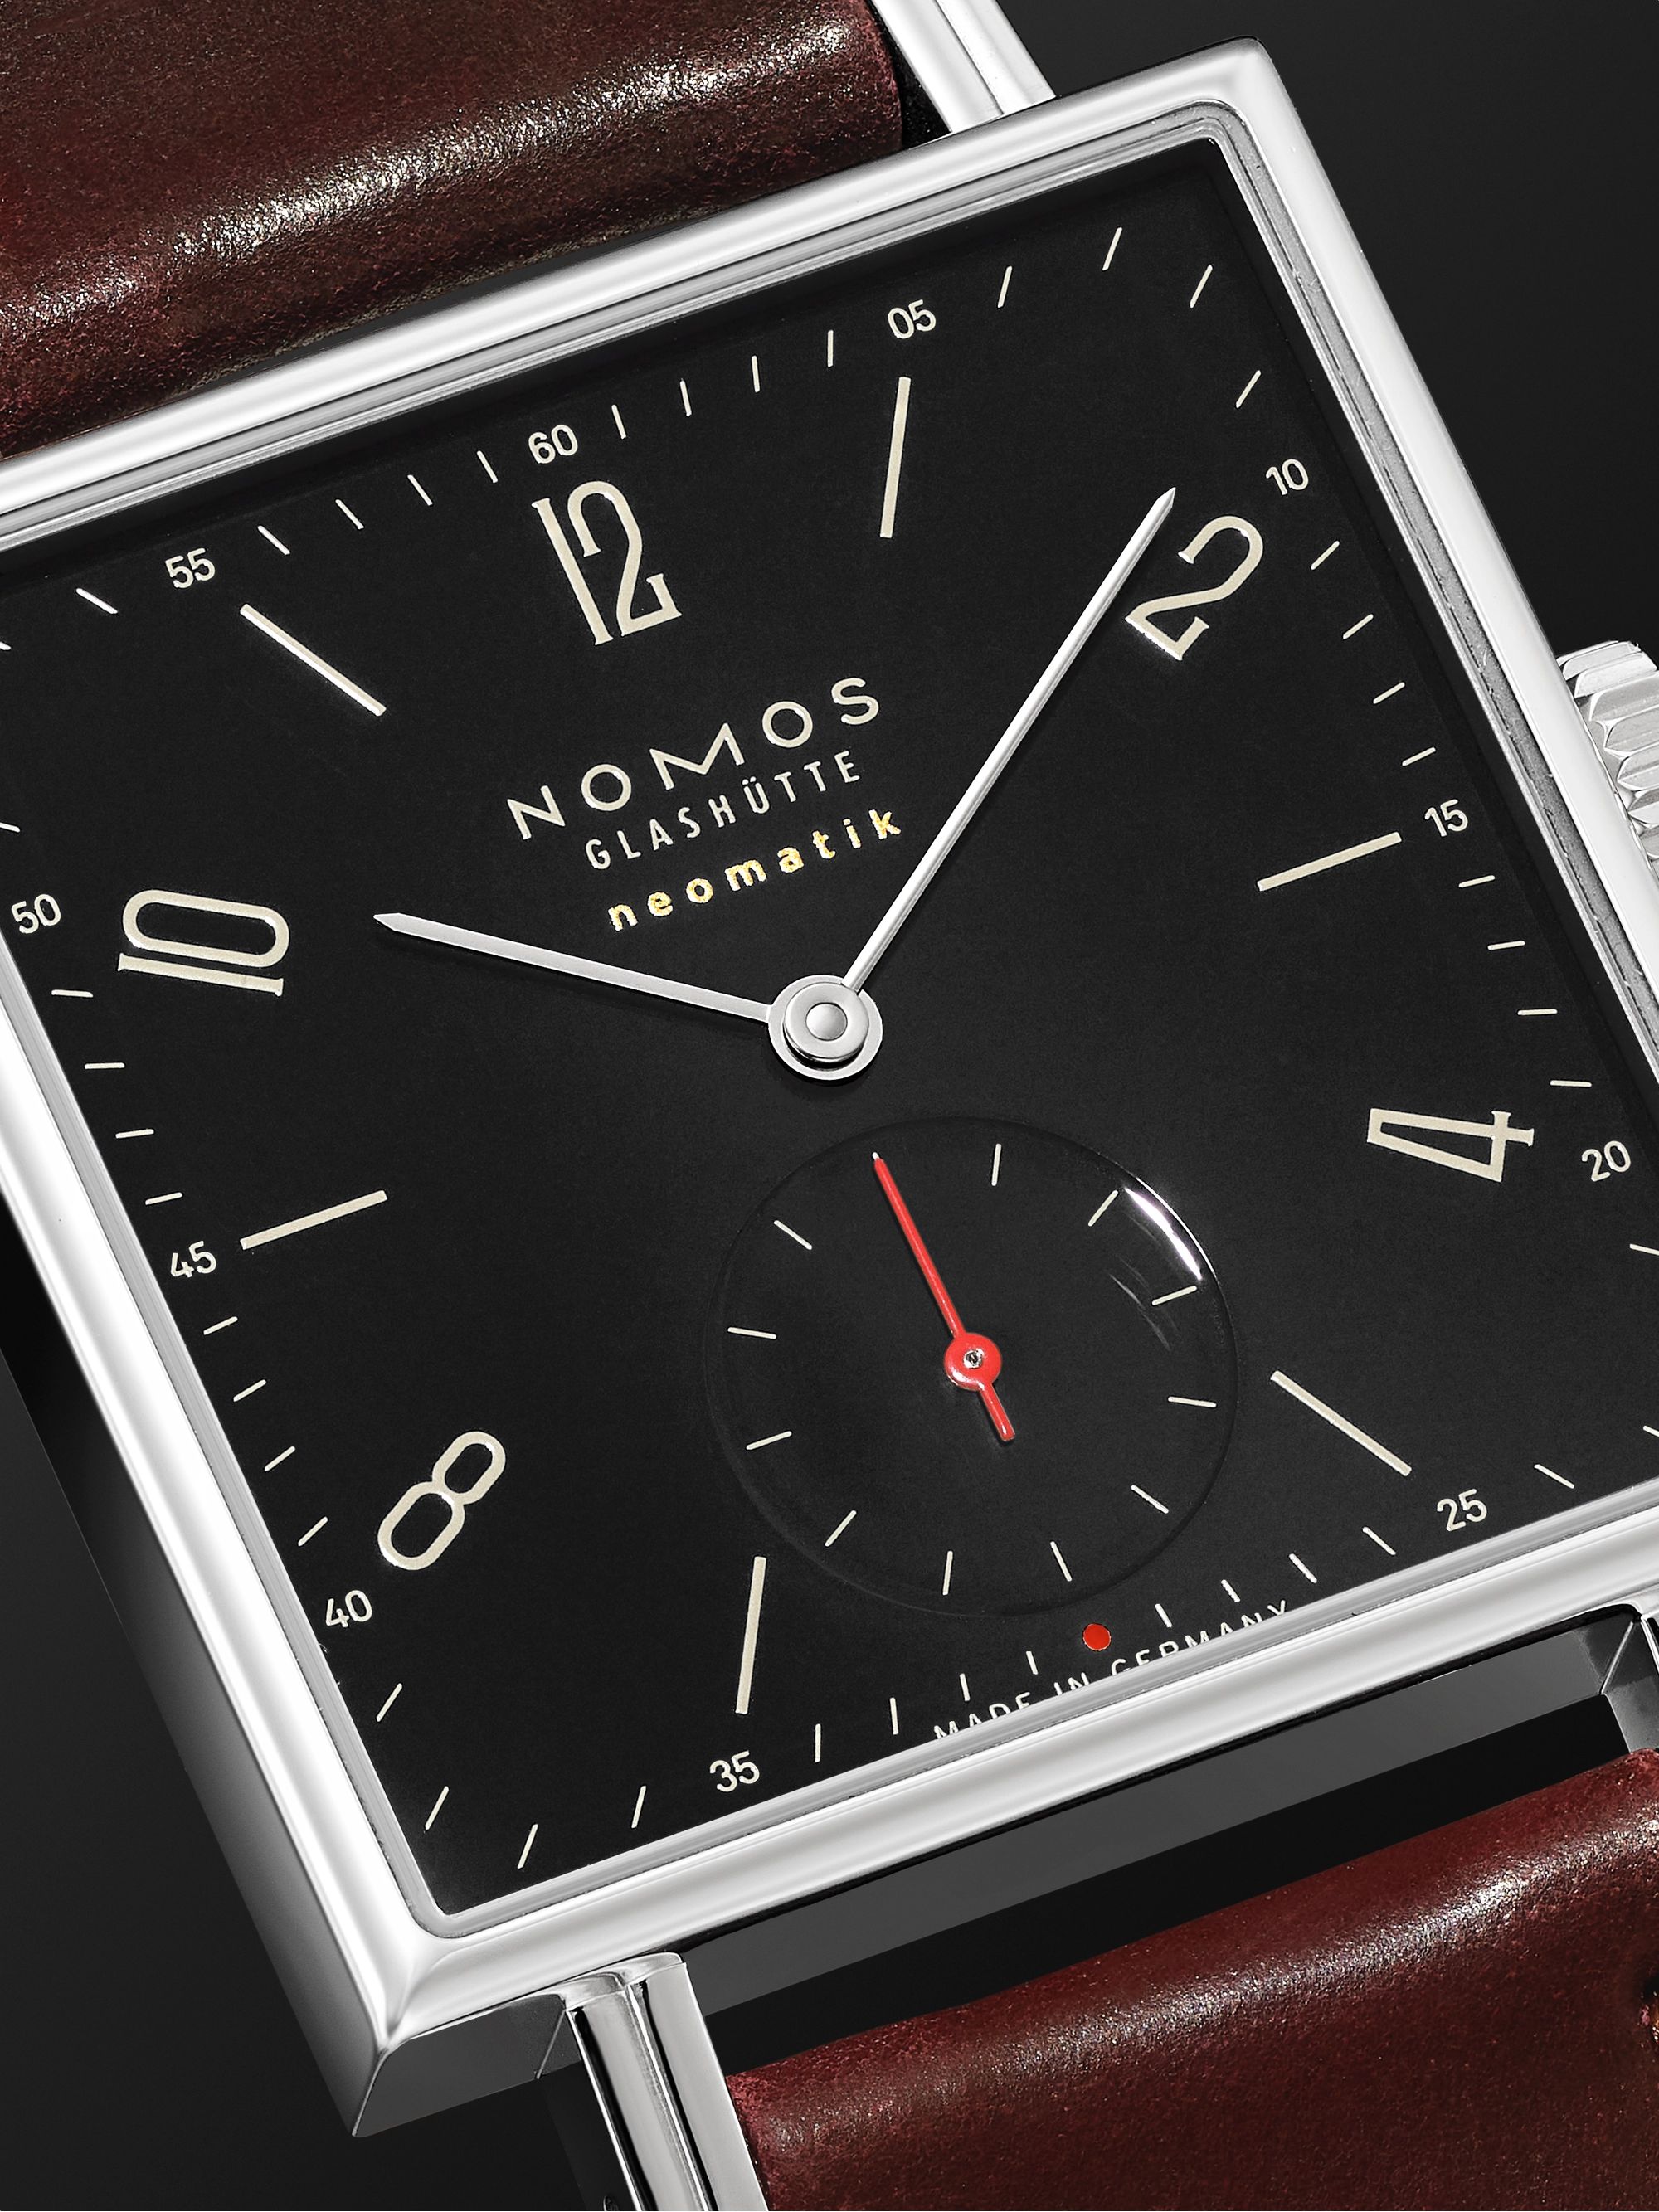 NOMOS GLASHÜTTE Tetra Neomatik 39 Automatic 46mm Stainless Steel and Leather Watch, Ref. No. 421.S1